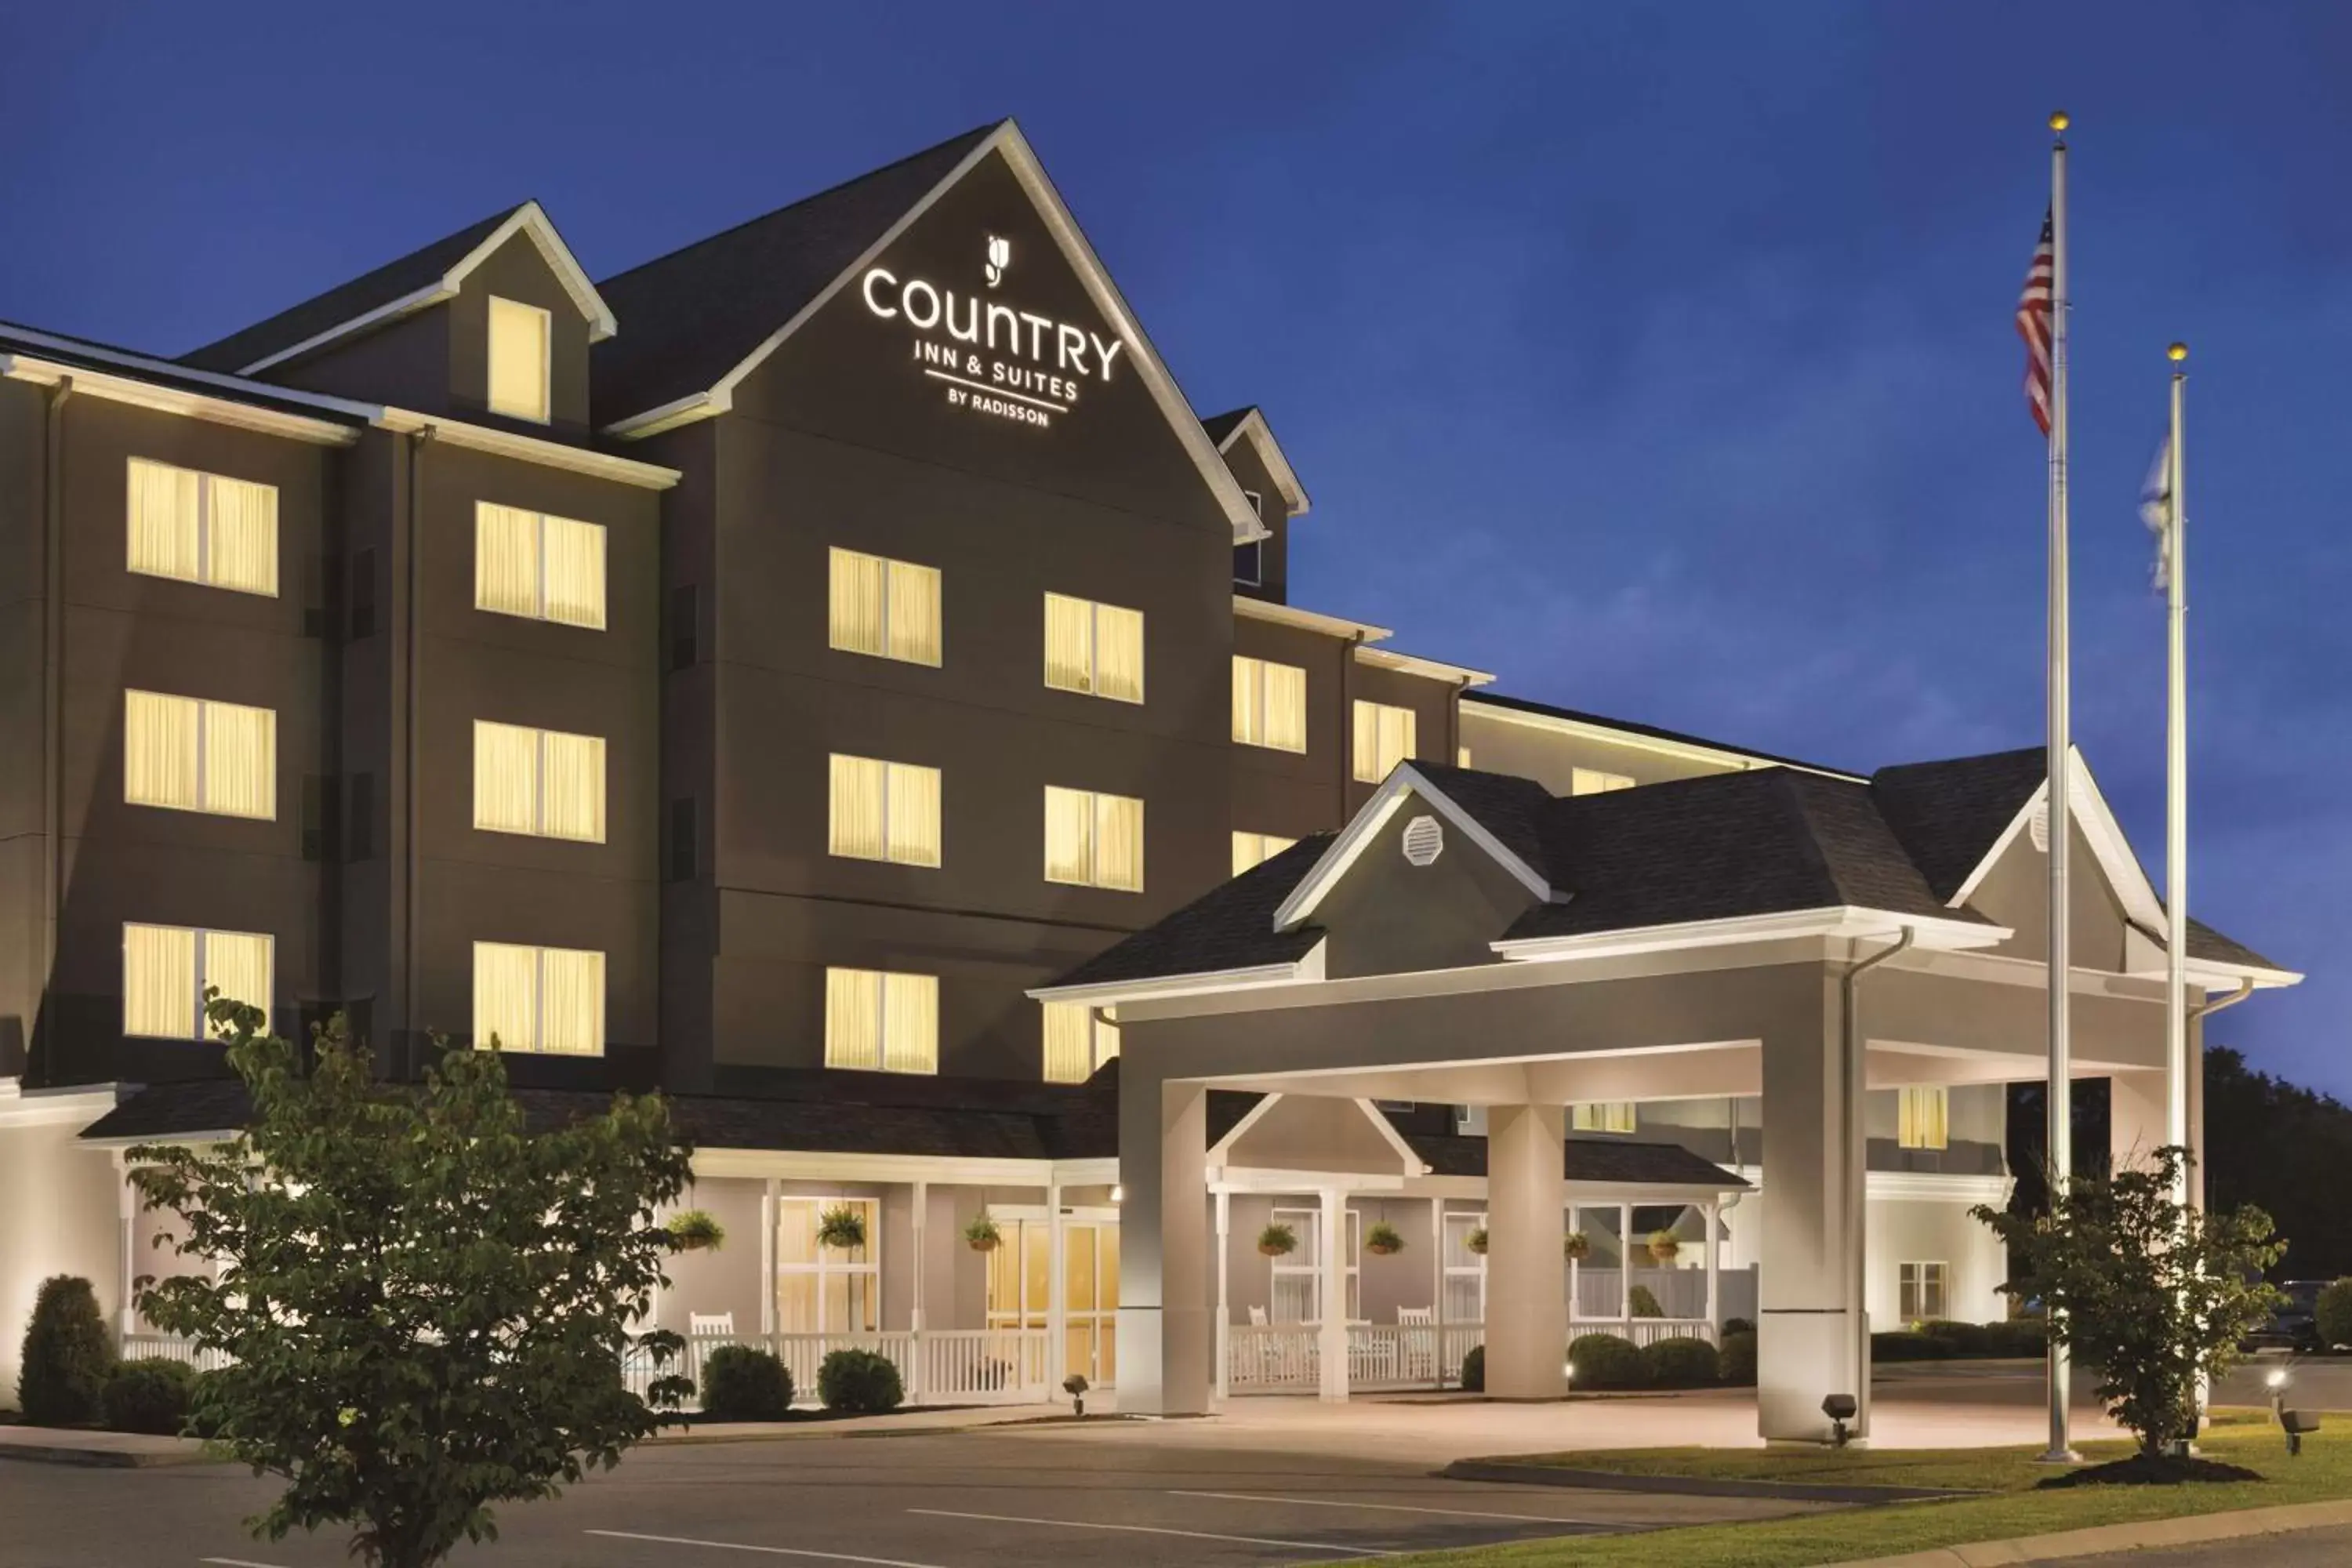 Property Building in Country Inn & Suites by Radisson, Princeton, WV